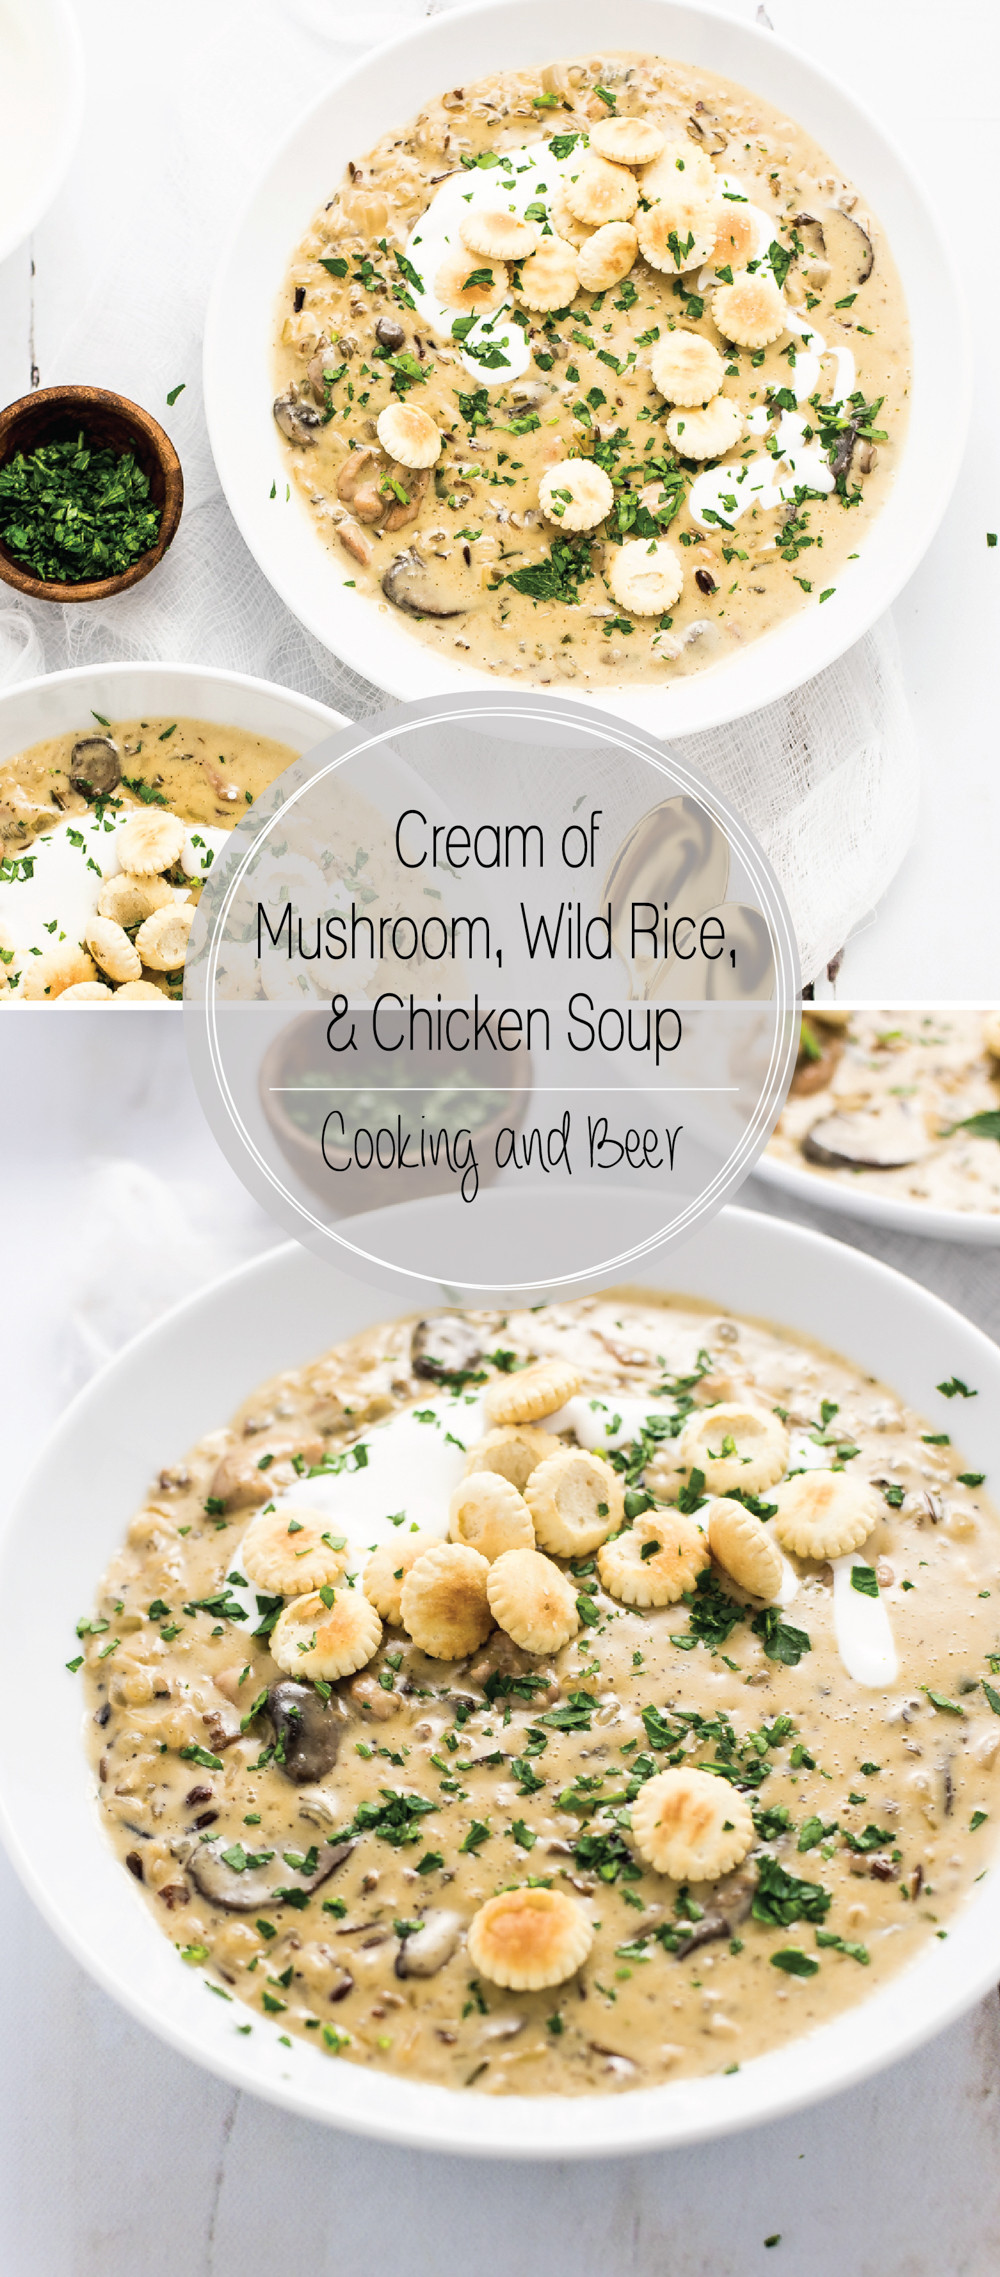 Cream Of Chicken And Rice Soup
 Cream of Mushroom Wild Rice and Chicken SoupCooking and Beer